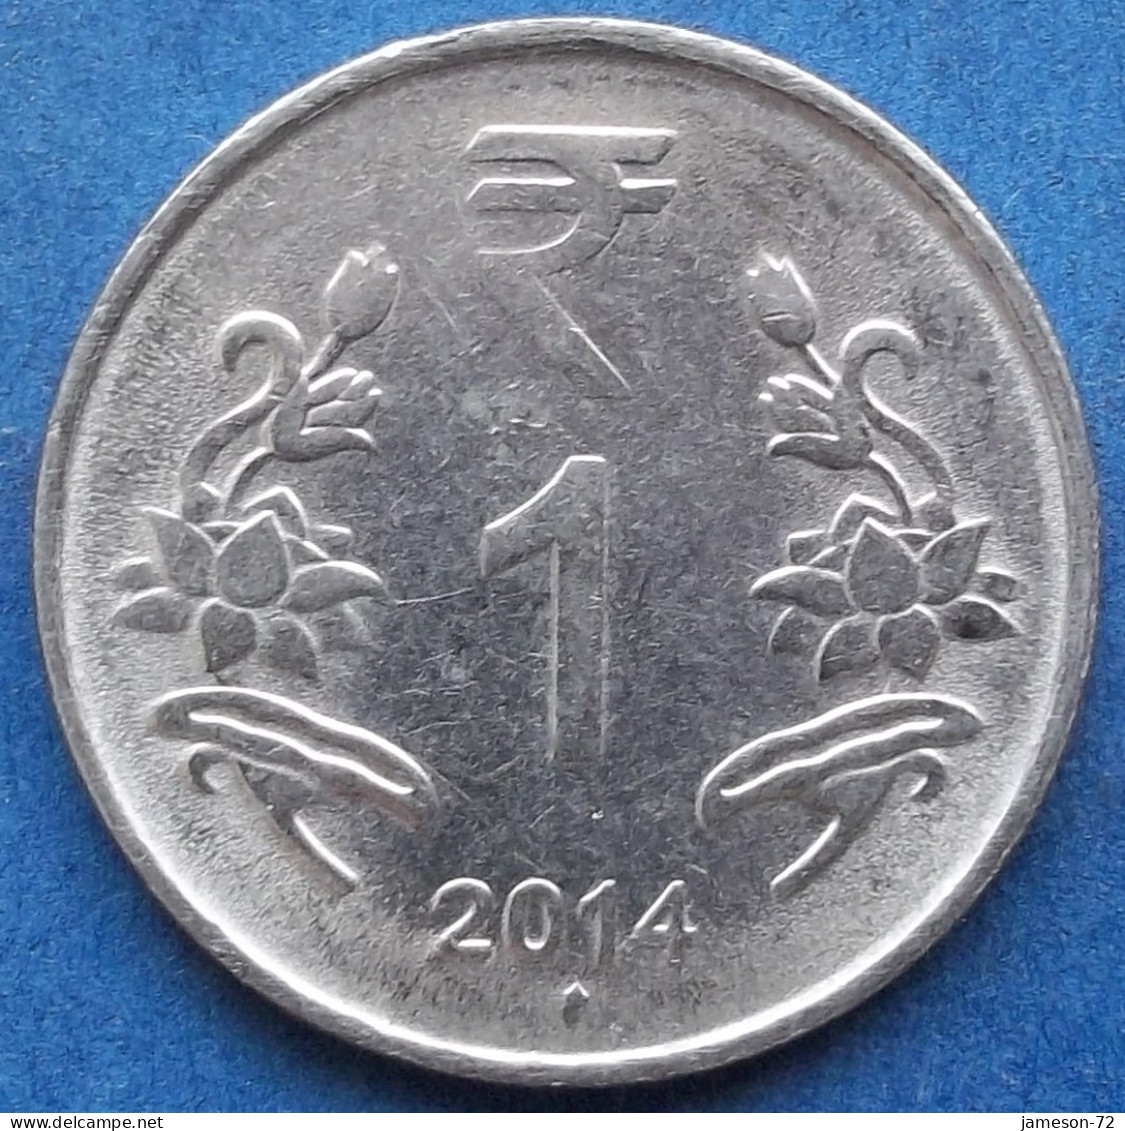 INDIA - 1 Rupee 2014 "Lotus Flowers" KM# 394 Republic Decimal Coinage (1957) - Edelweiss Coins - Georgien